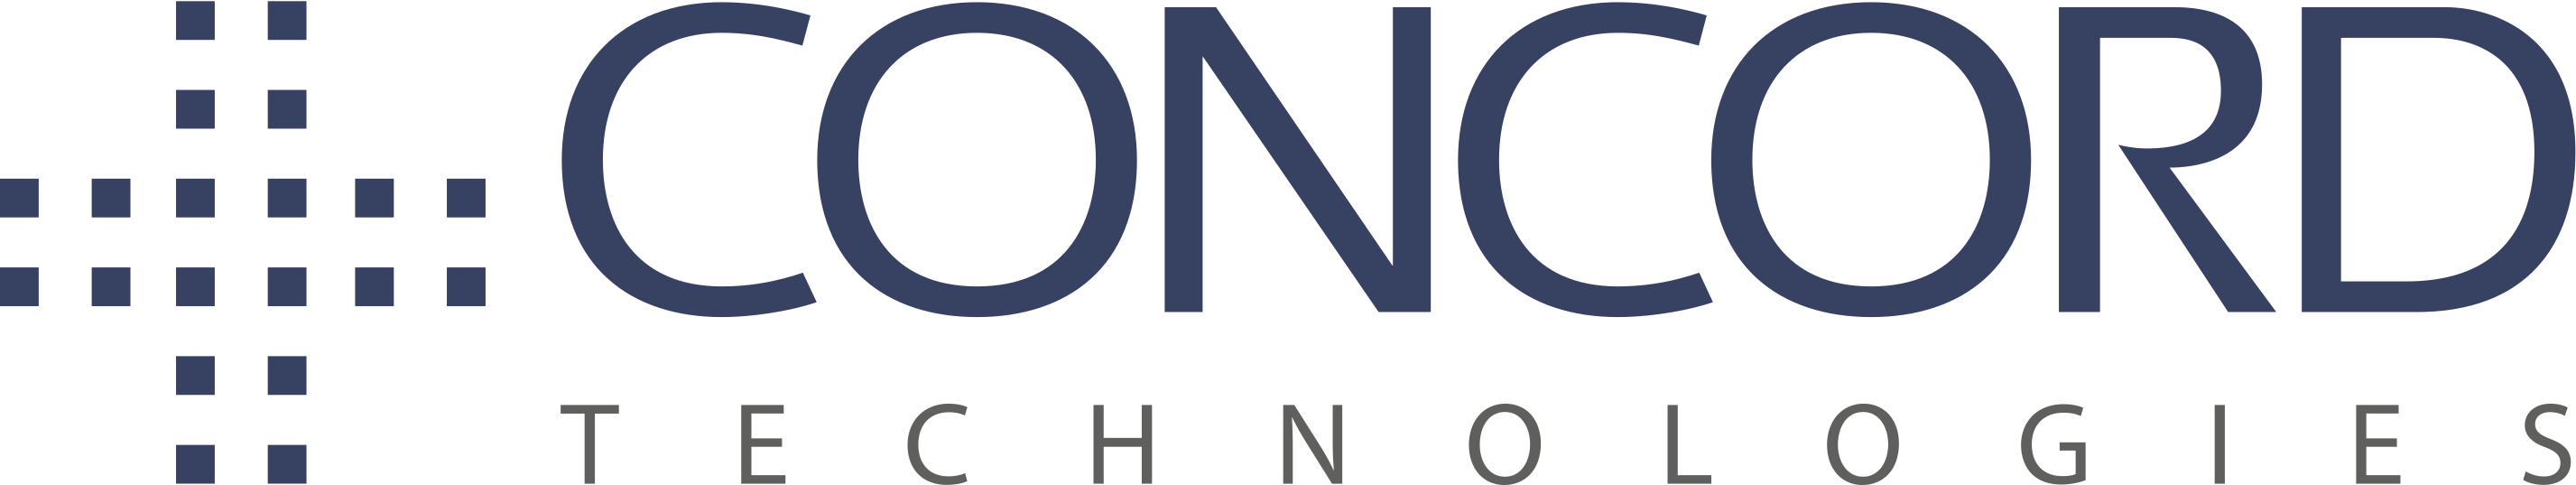 LOGO-Concord Technologies.png